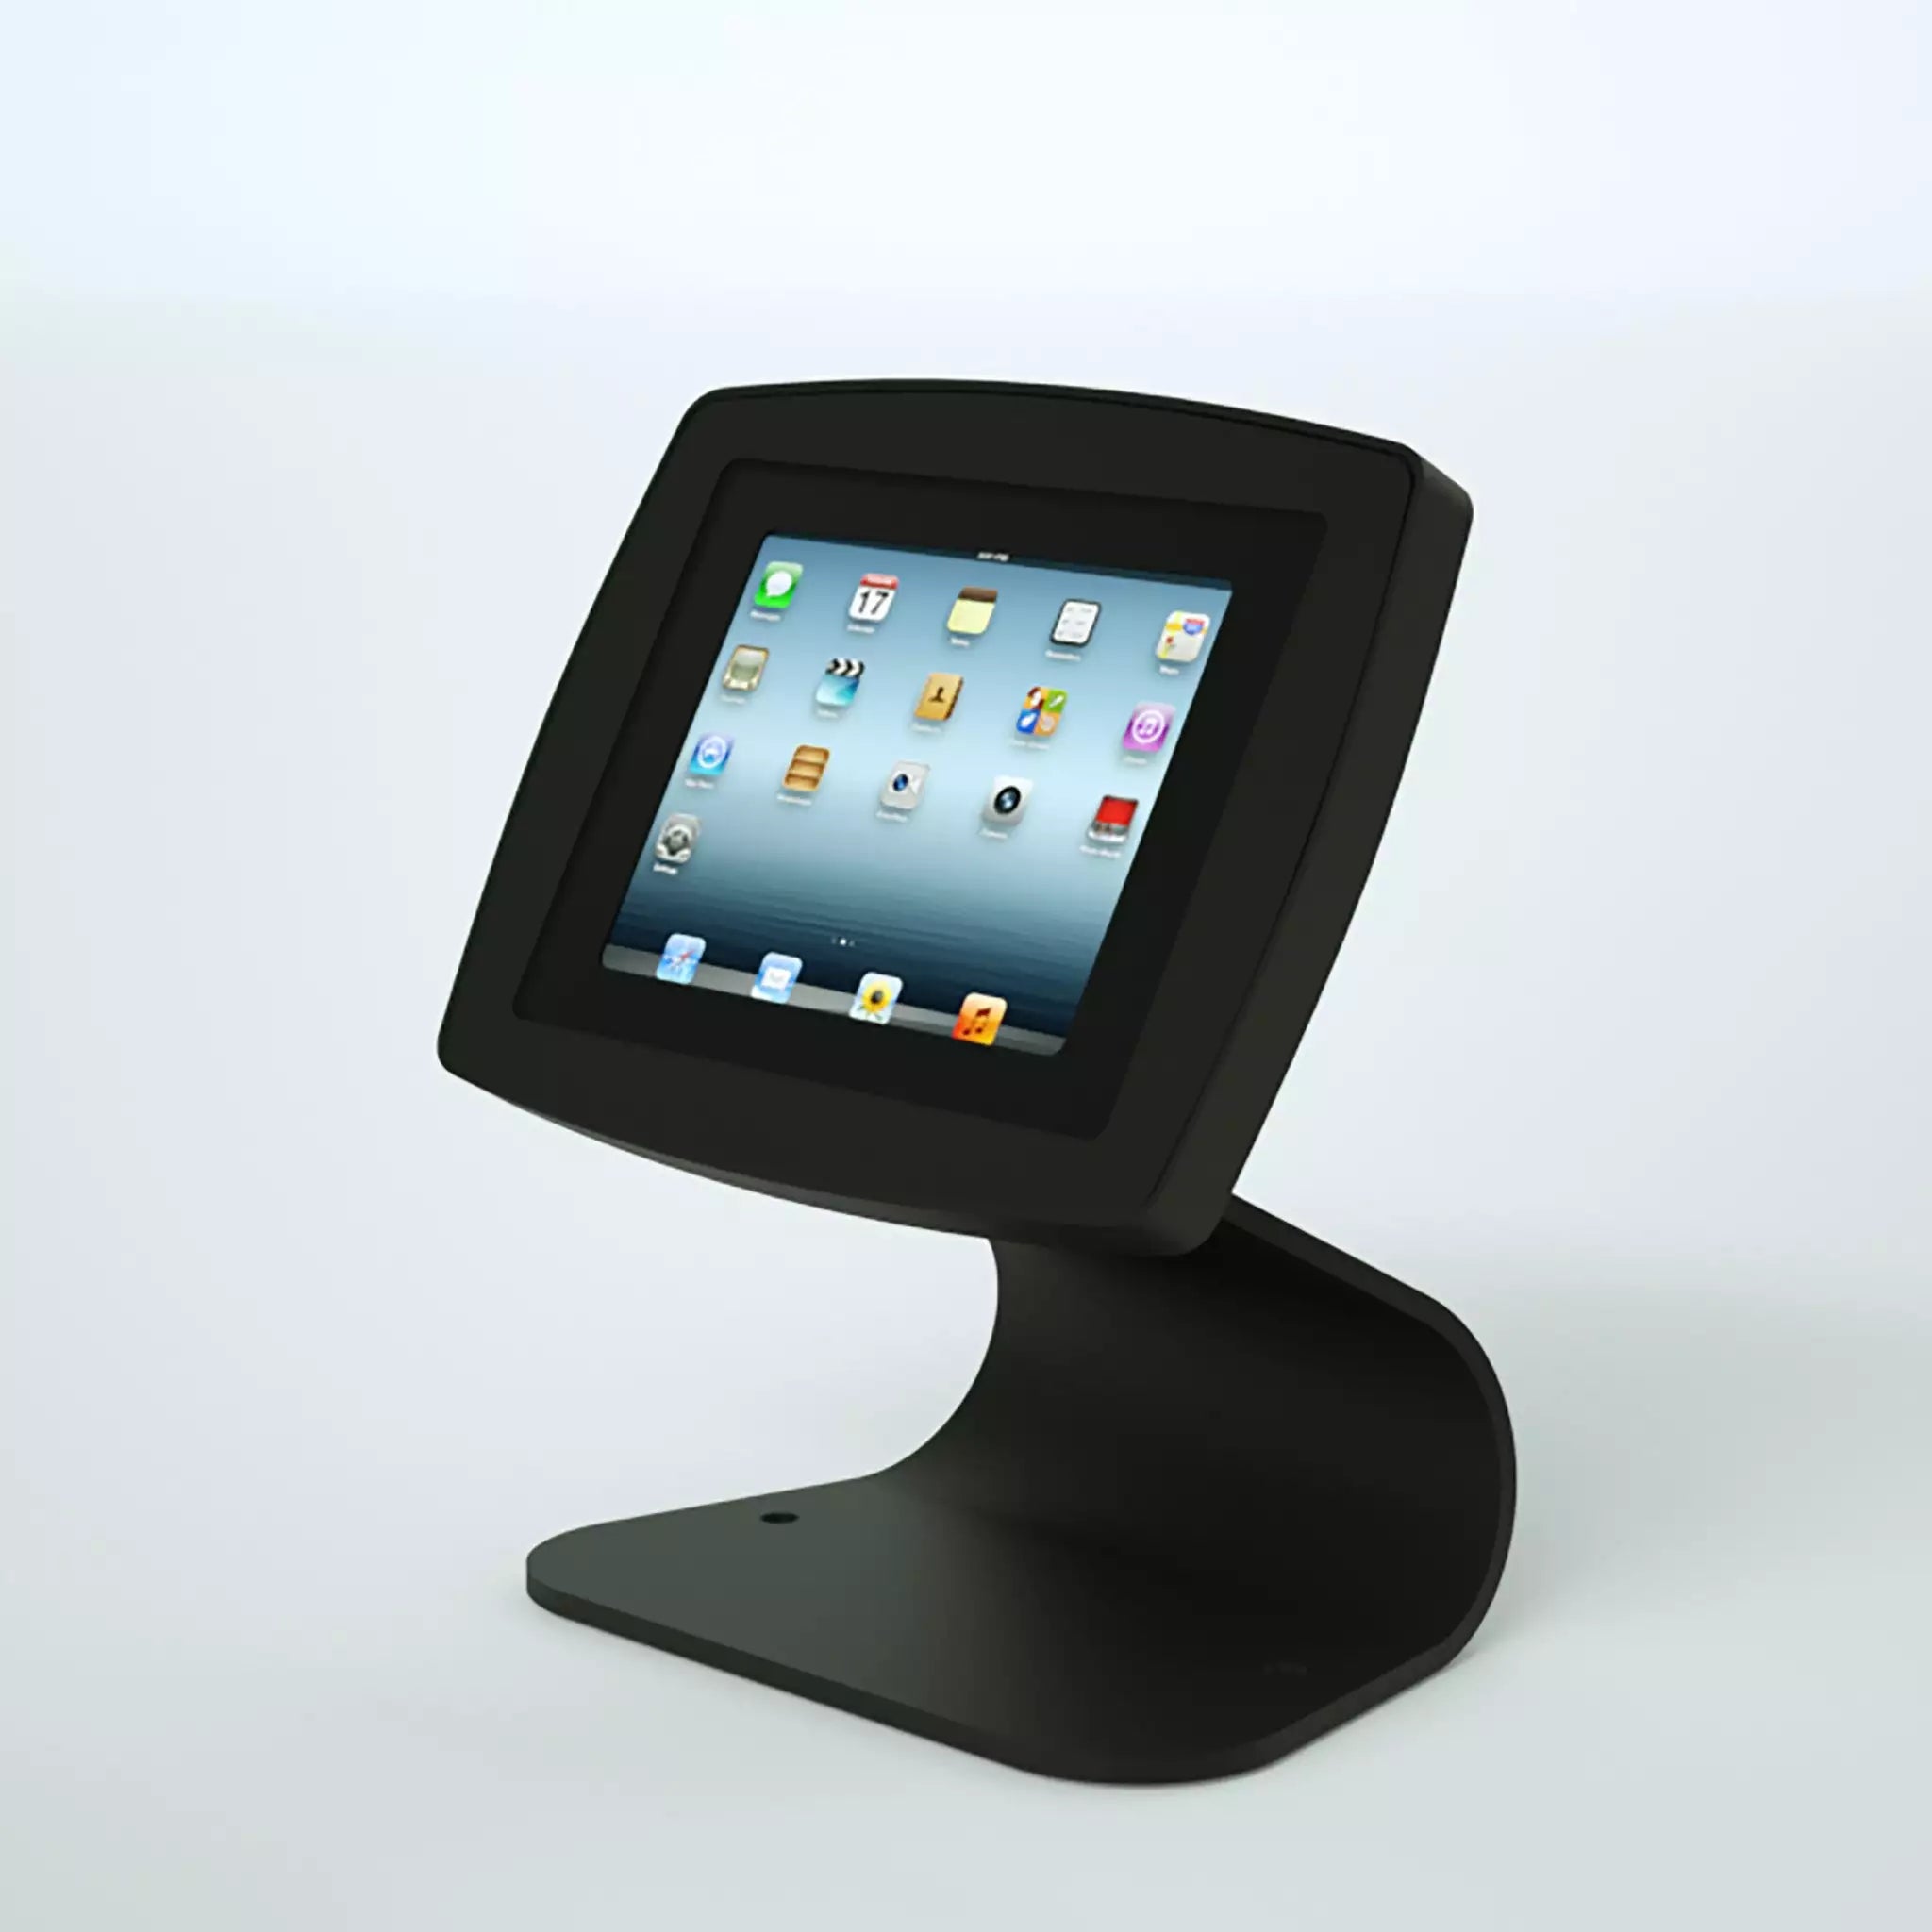 Black Curve iPad and Tablet Desktop stand. Showcasing the stand and face of the tablet.